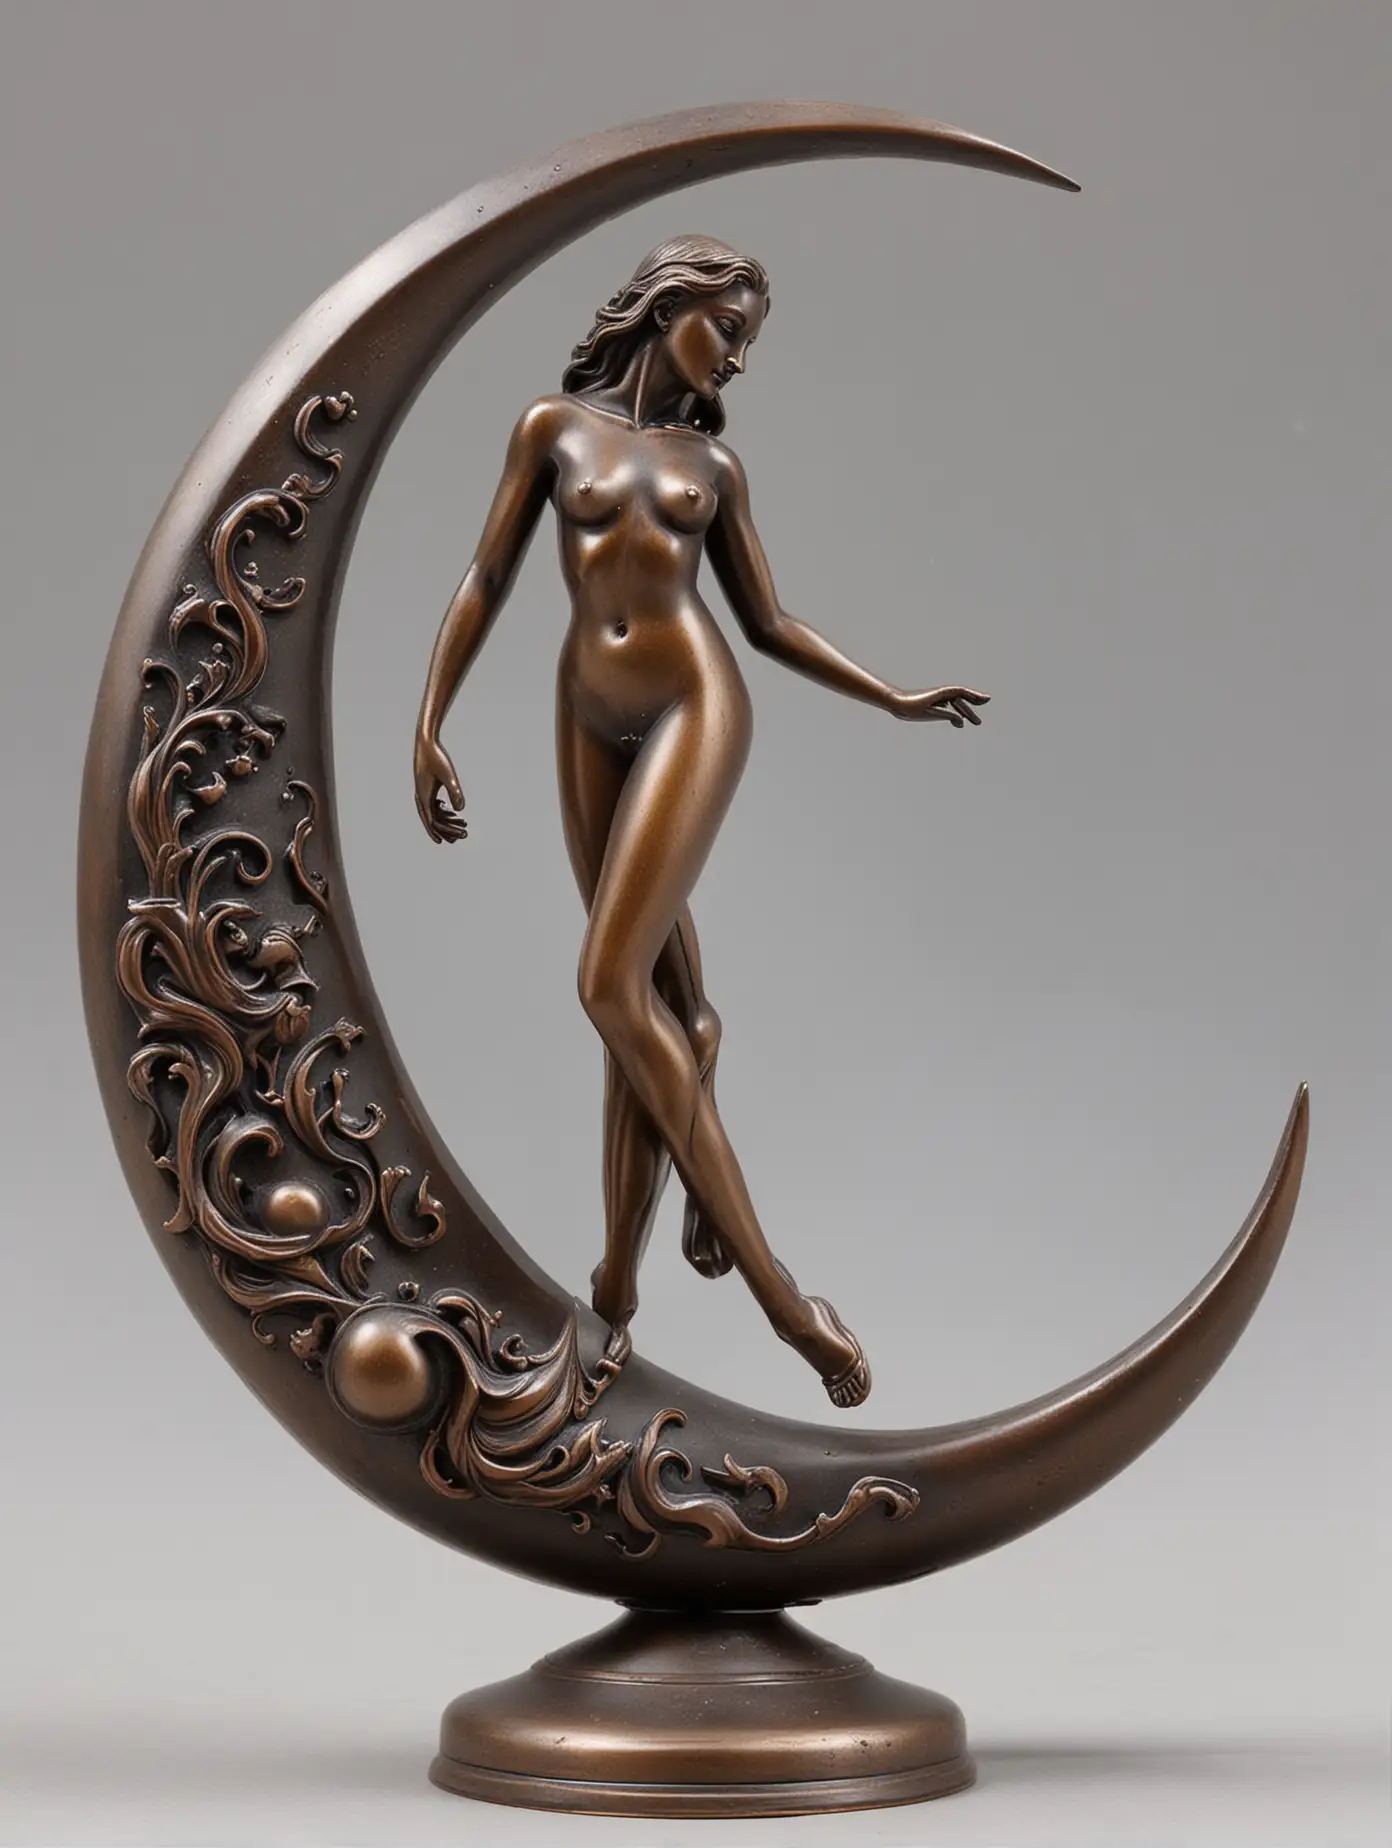 metal Chess piece in the shape of a crescent moon and nude girl
